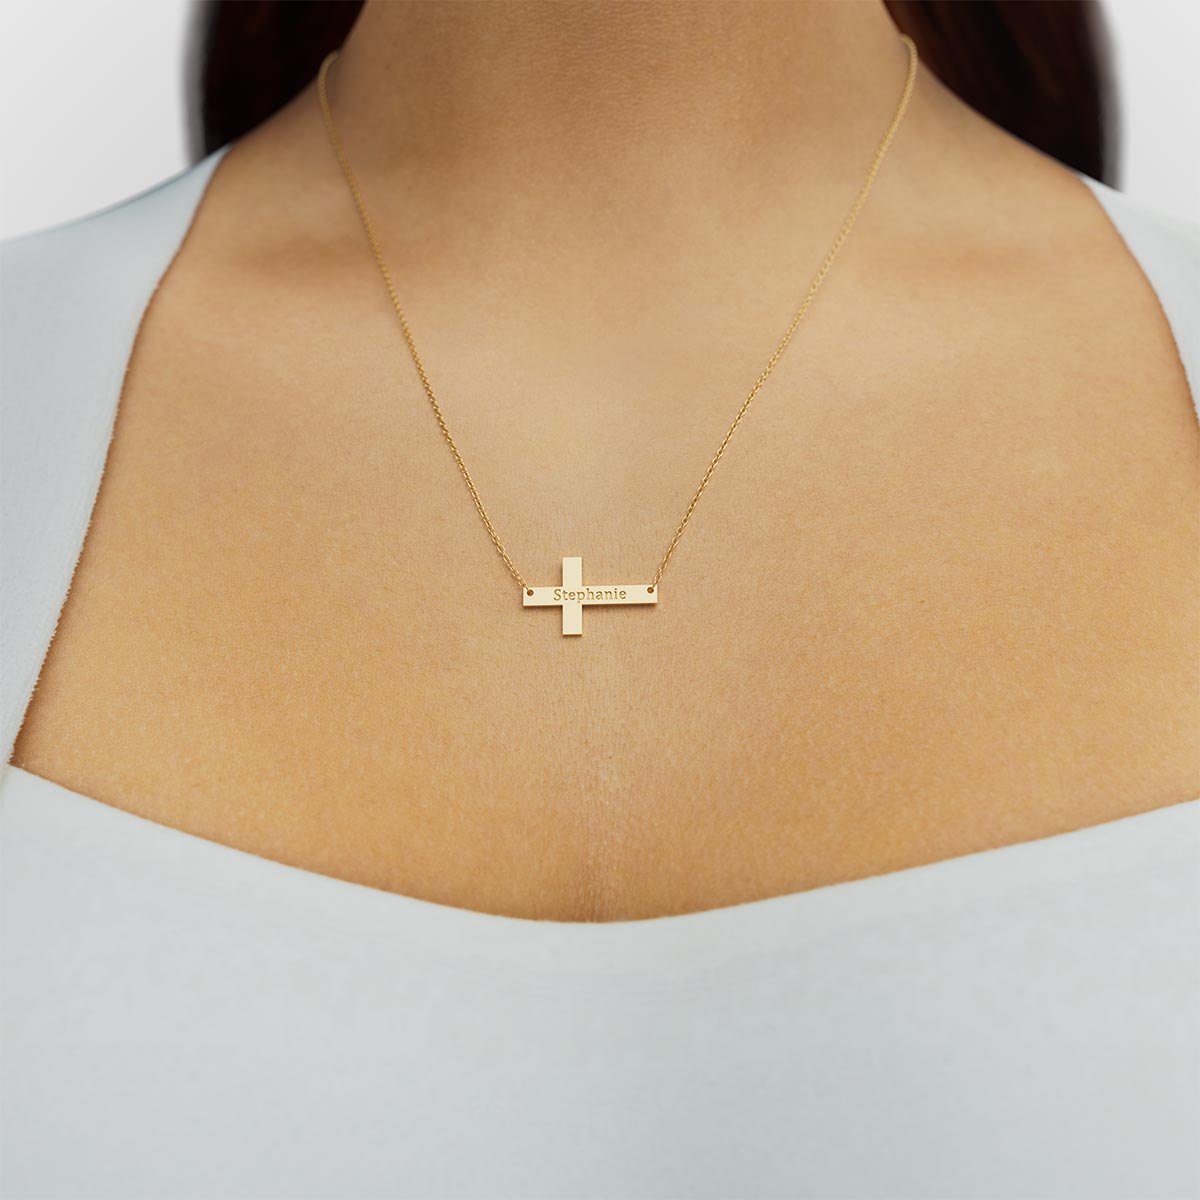 Sideways Cross Necklace With Engraving